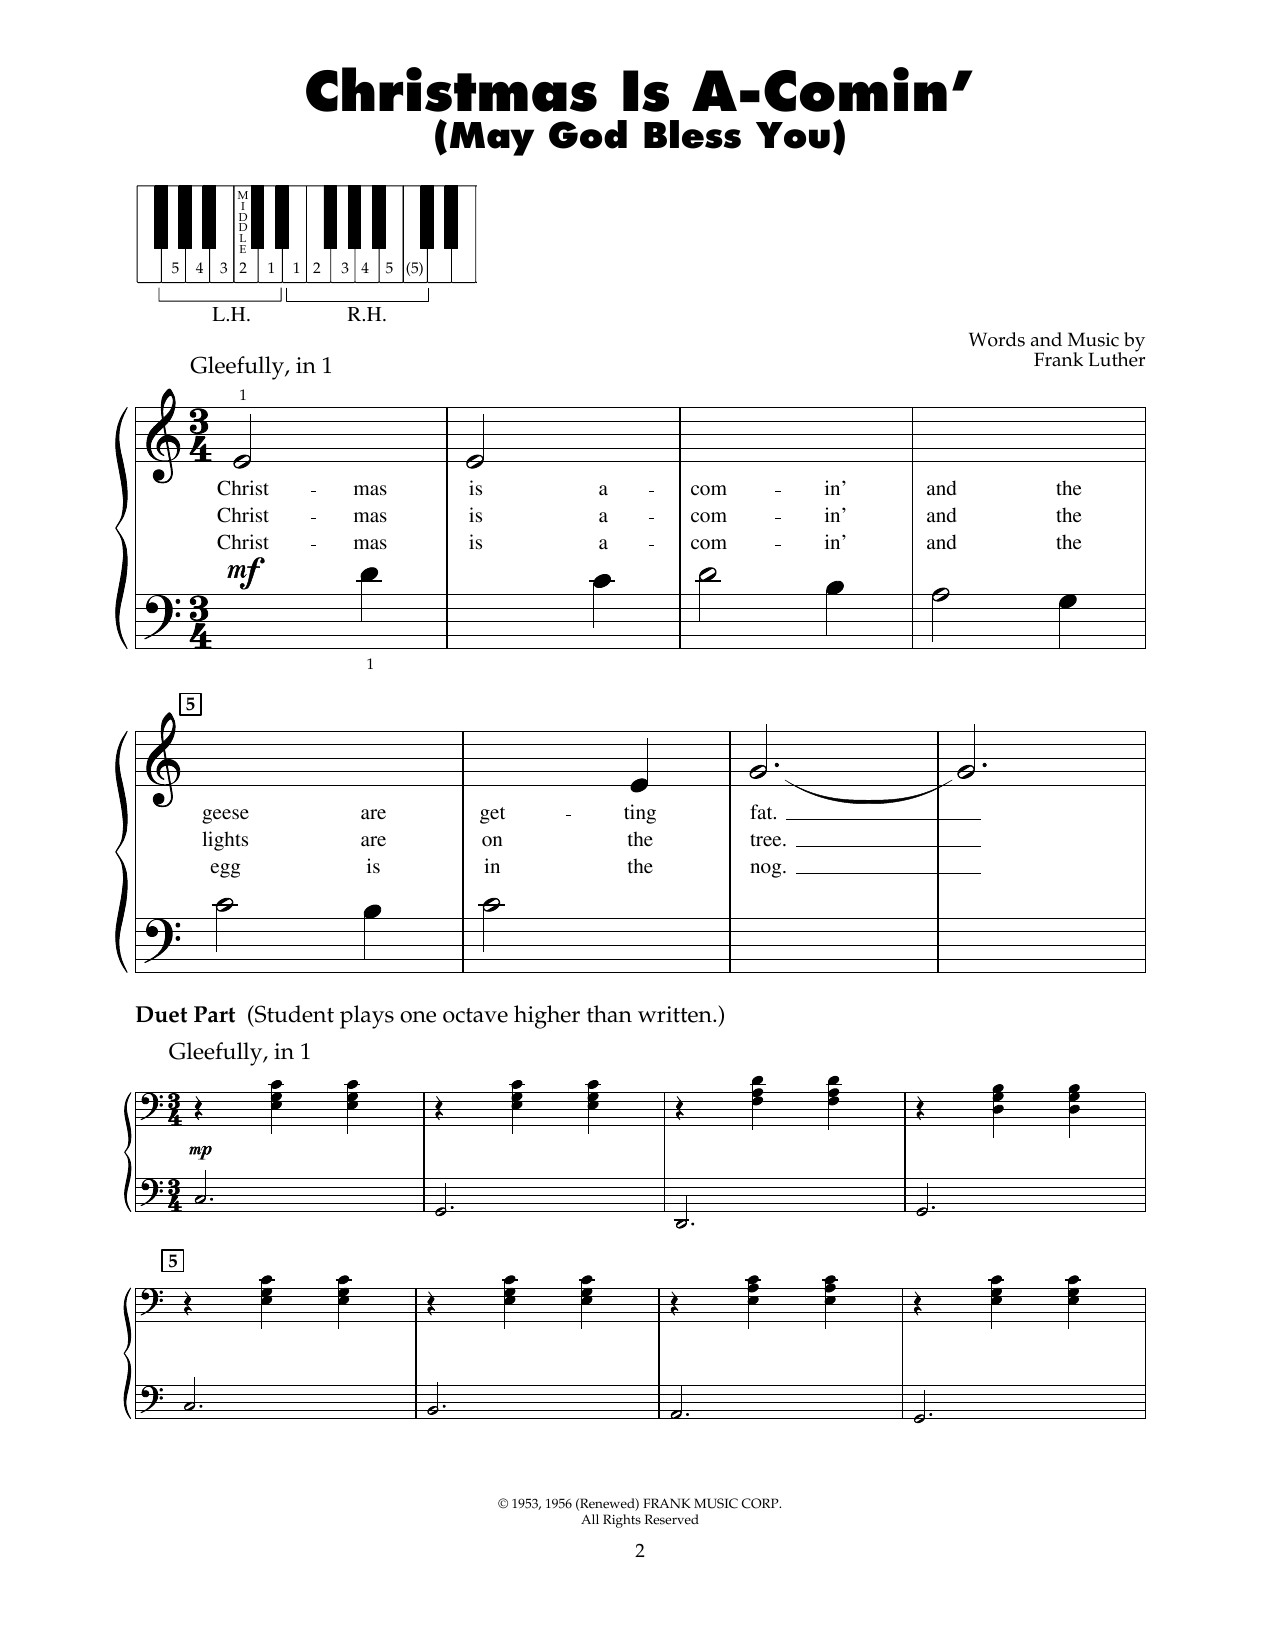 Frank Luther Christmas Is A-Comin' (May God Bless You) sheet music notes printable PDF score